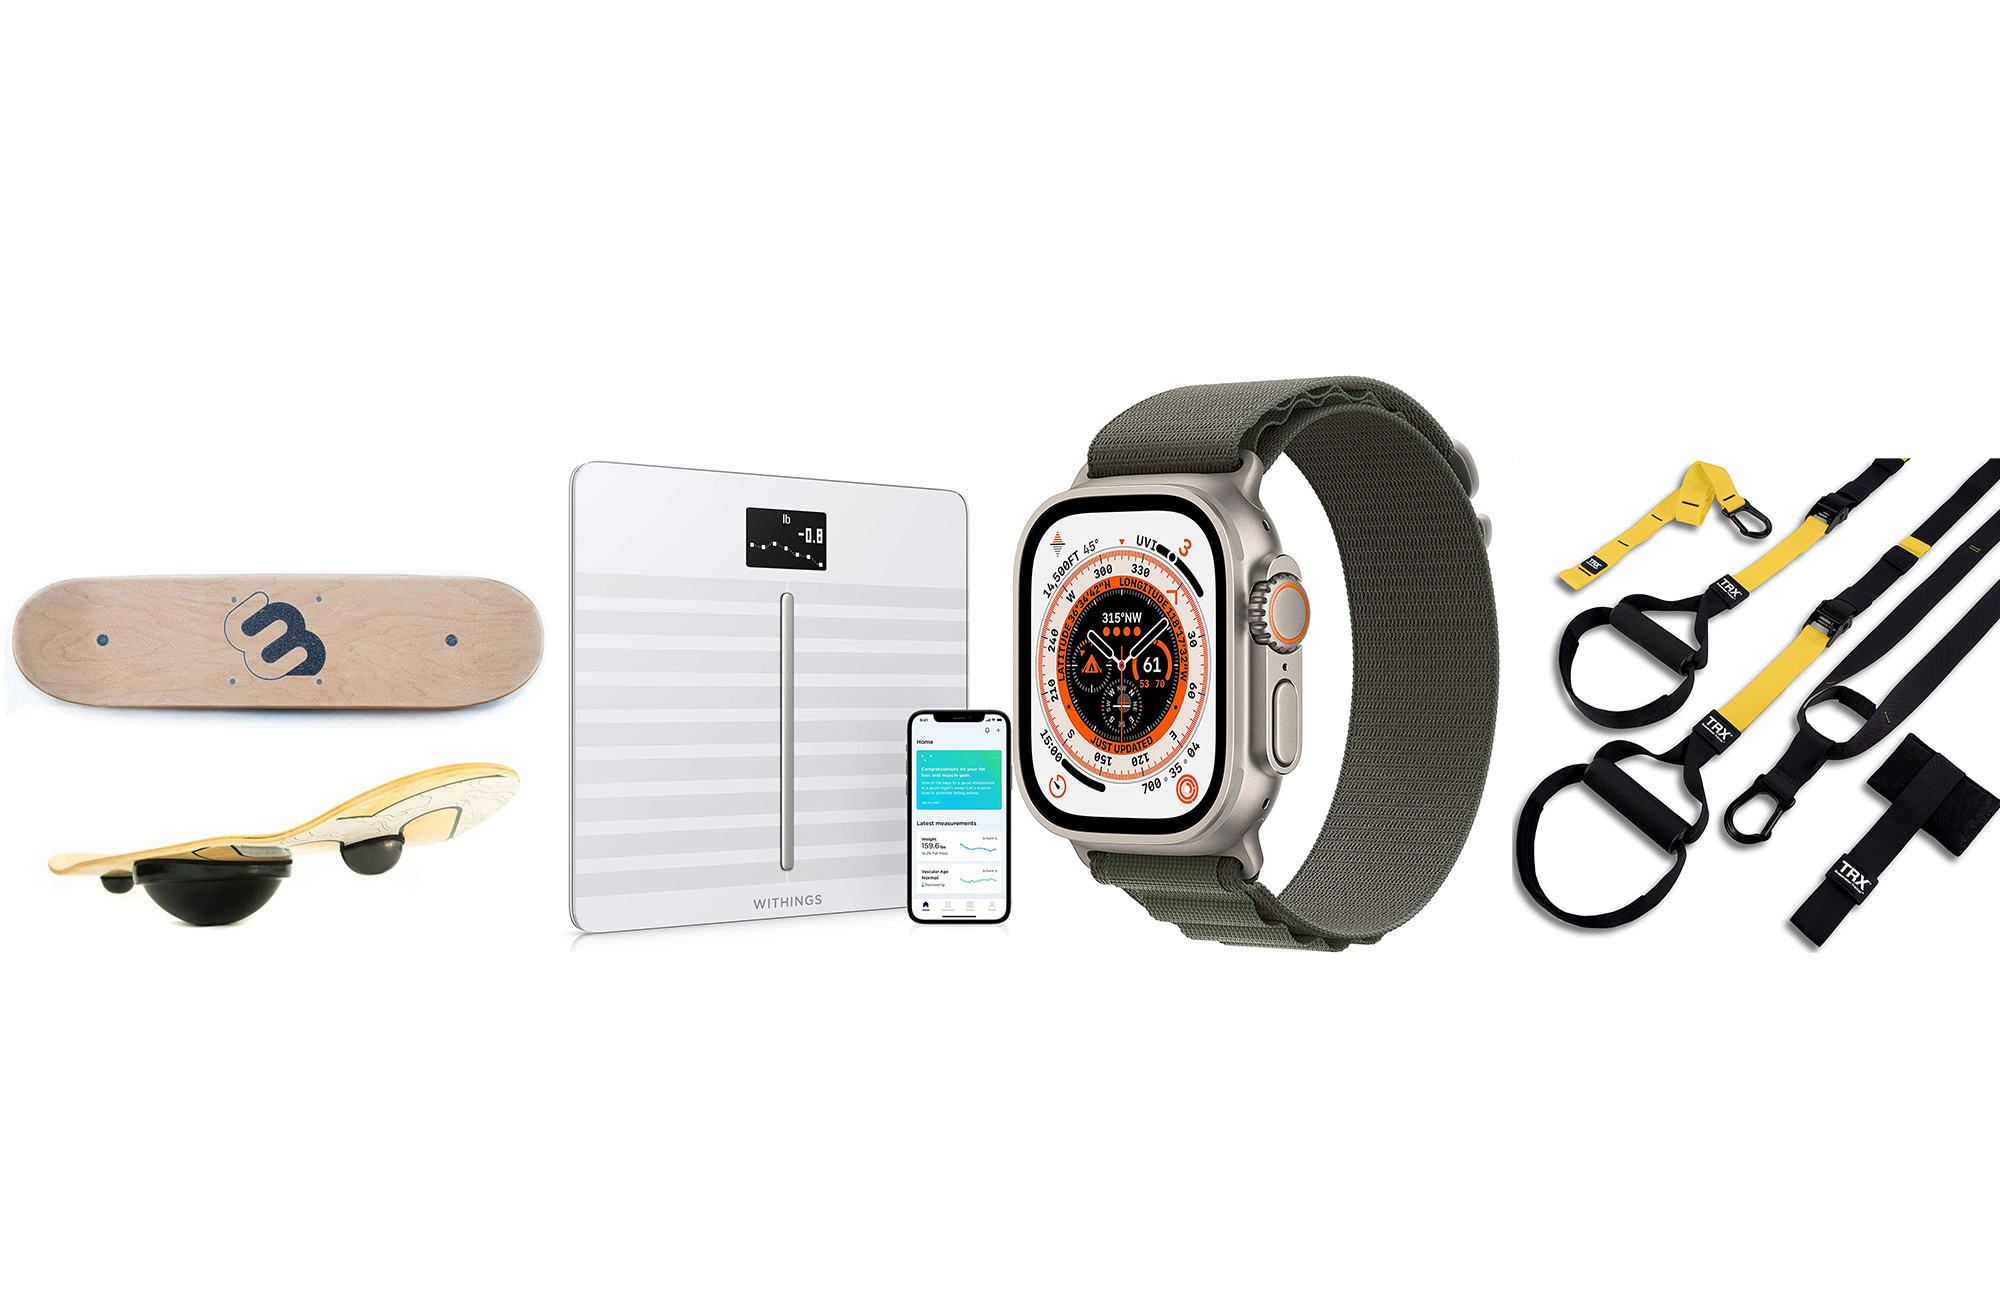 50 Best Fitness Gifts for 2023 - Gifts for Fitness Lovers